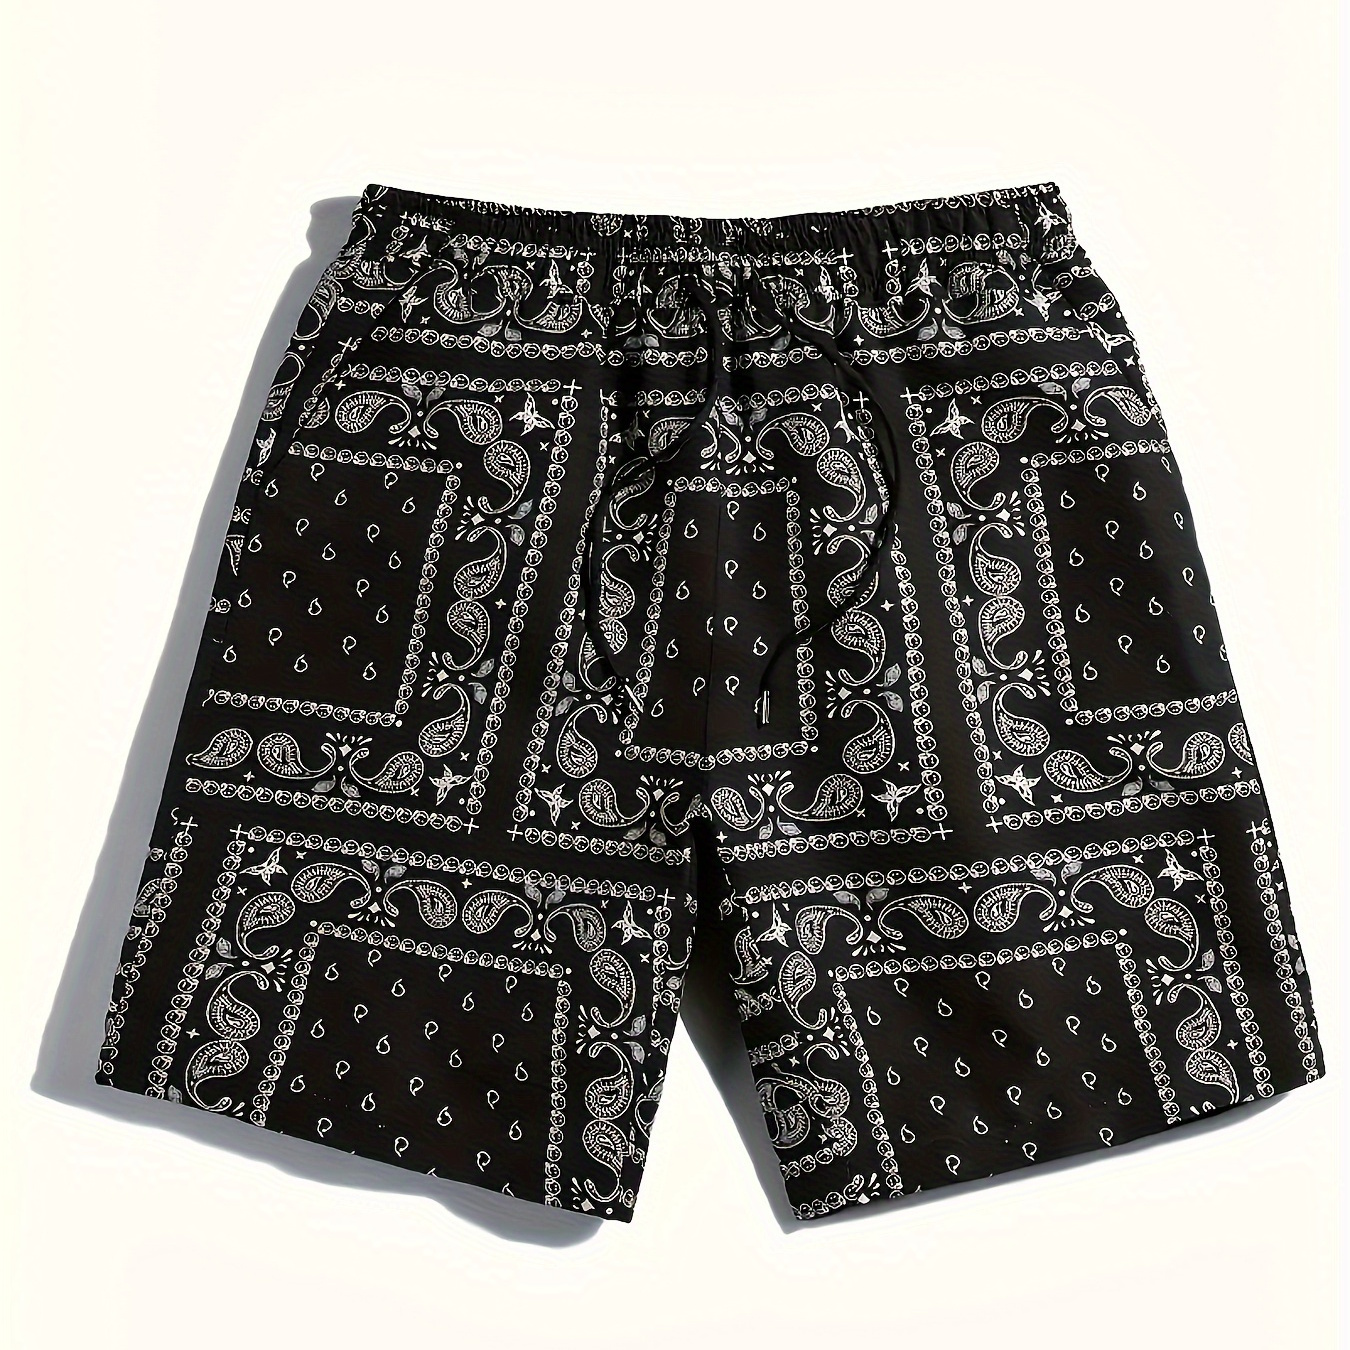 

Men's Paisley Pattern Graphic Print Shorts With Drawstring And Pockets, Chic And Stylish Shorts For Summer Fitness And Running Wear